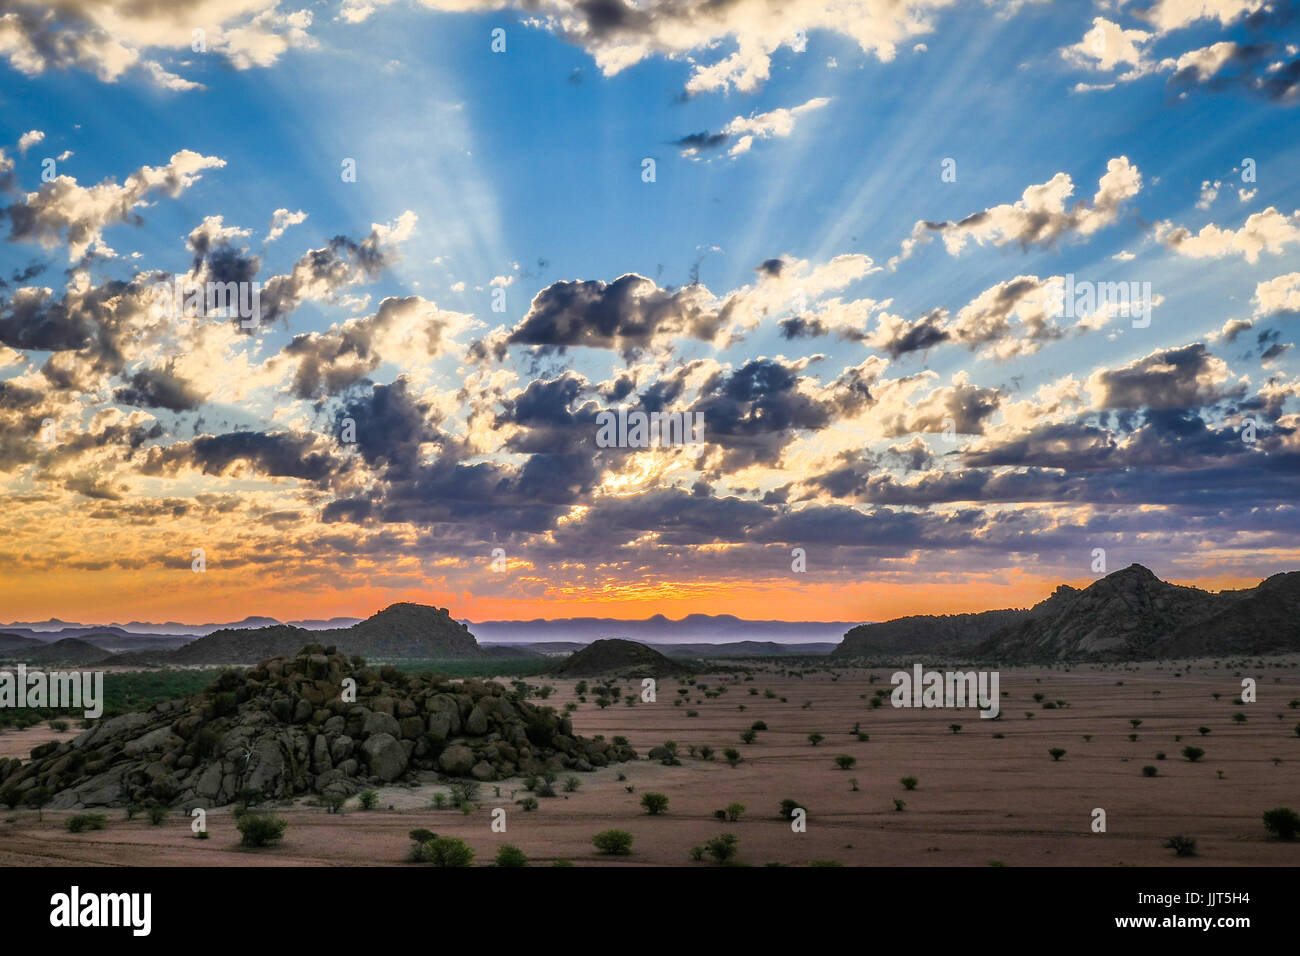 Sunset in the Namib Desert, one of the world's oldest deserts. Namibia, Africa Stock Photo